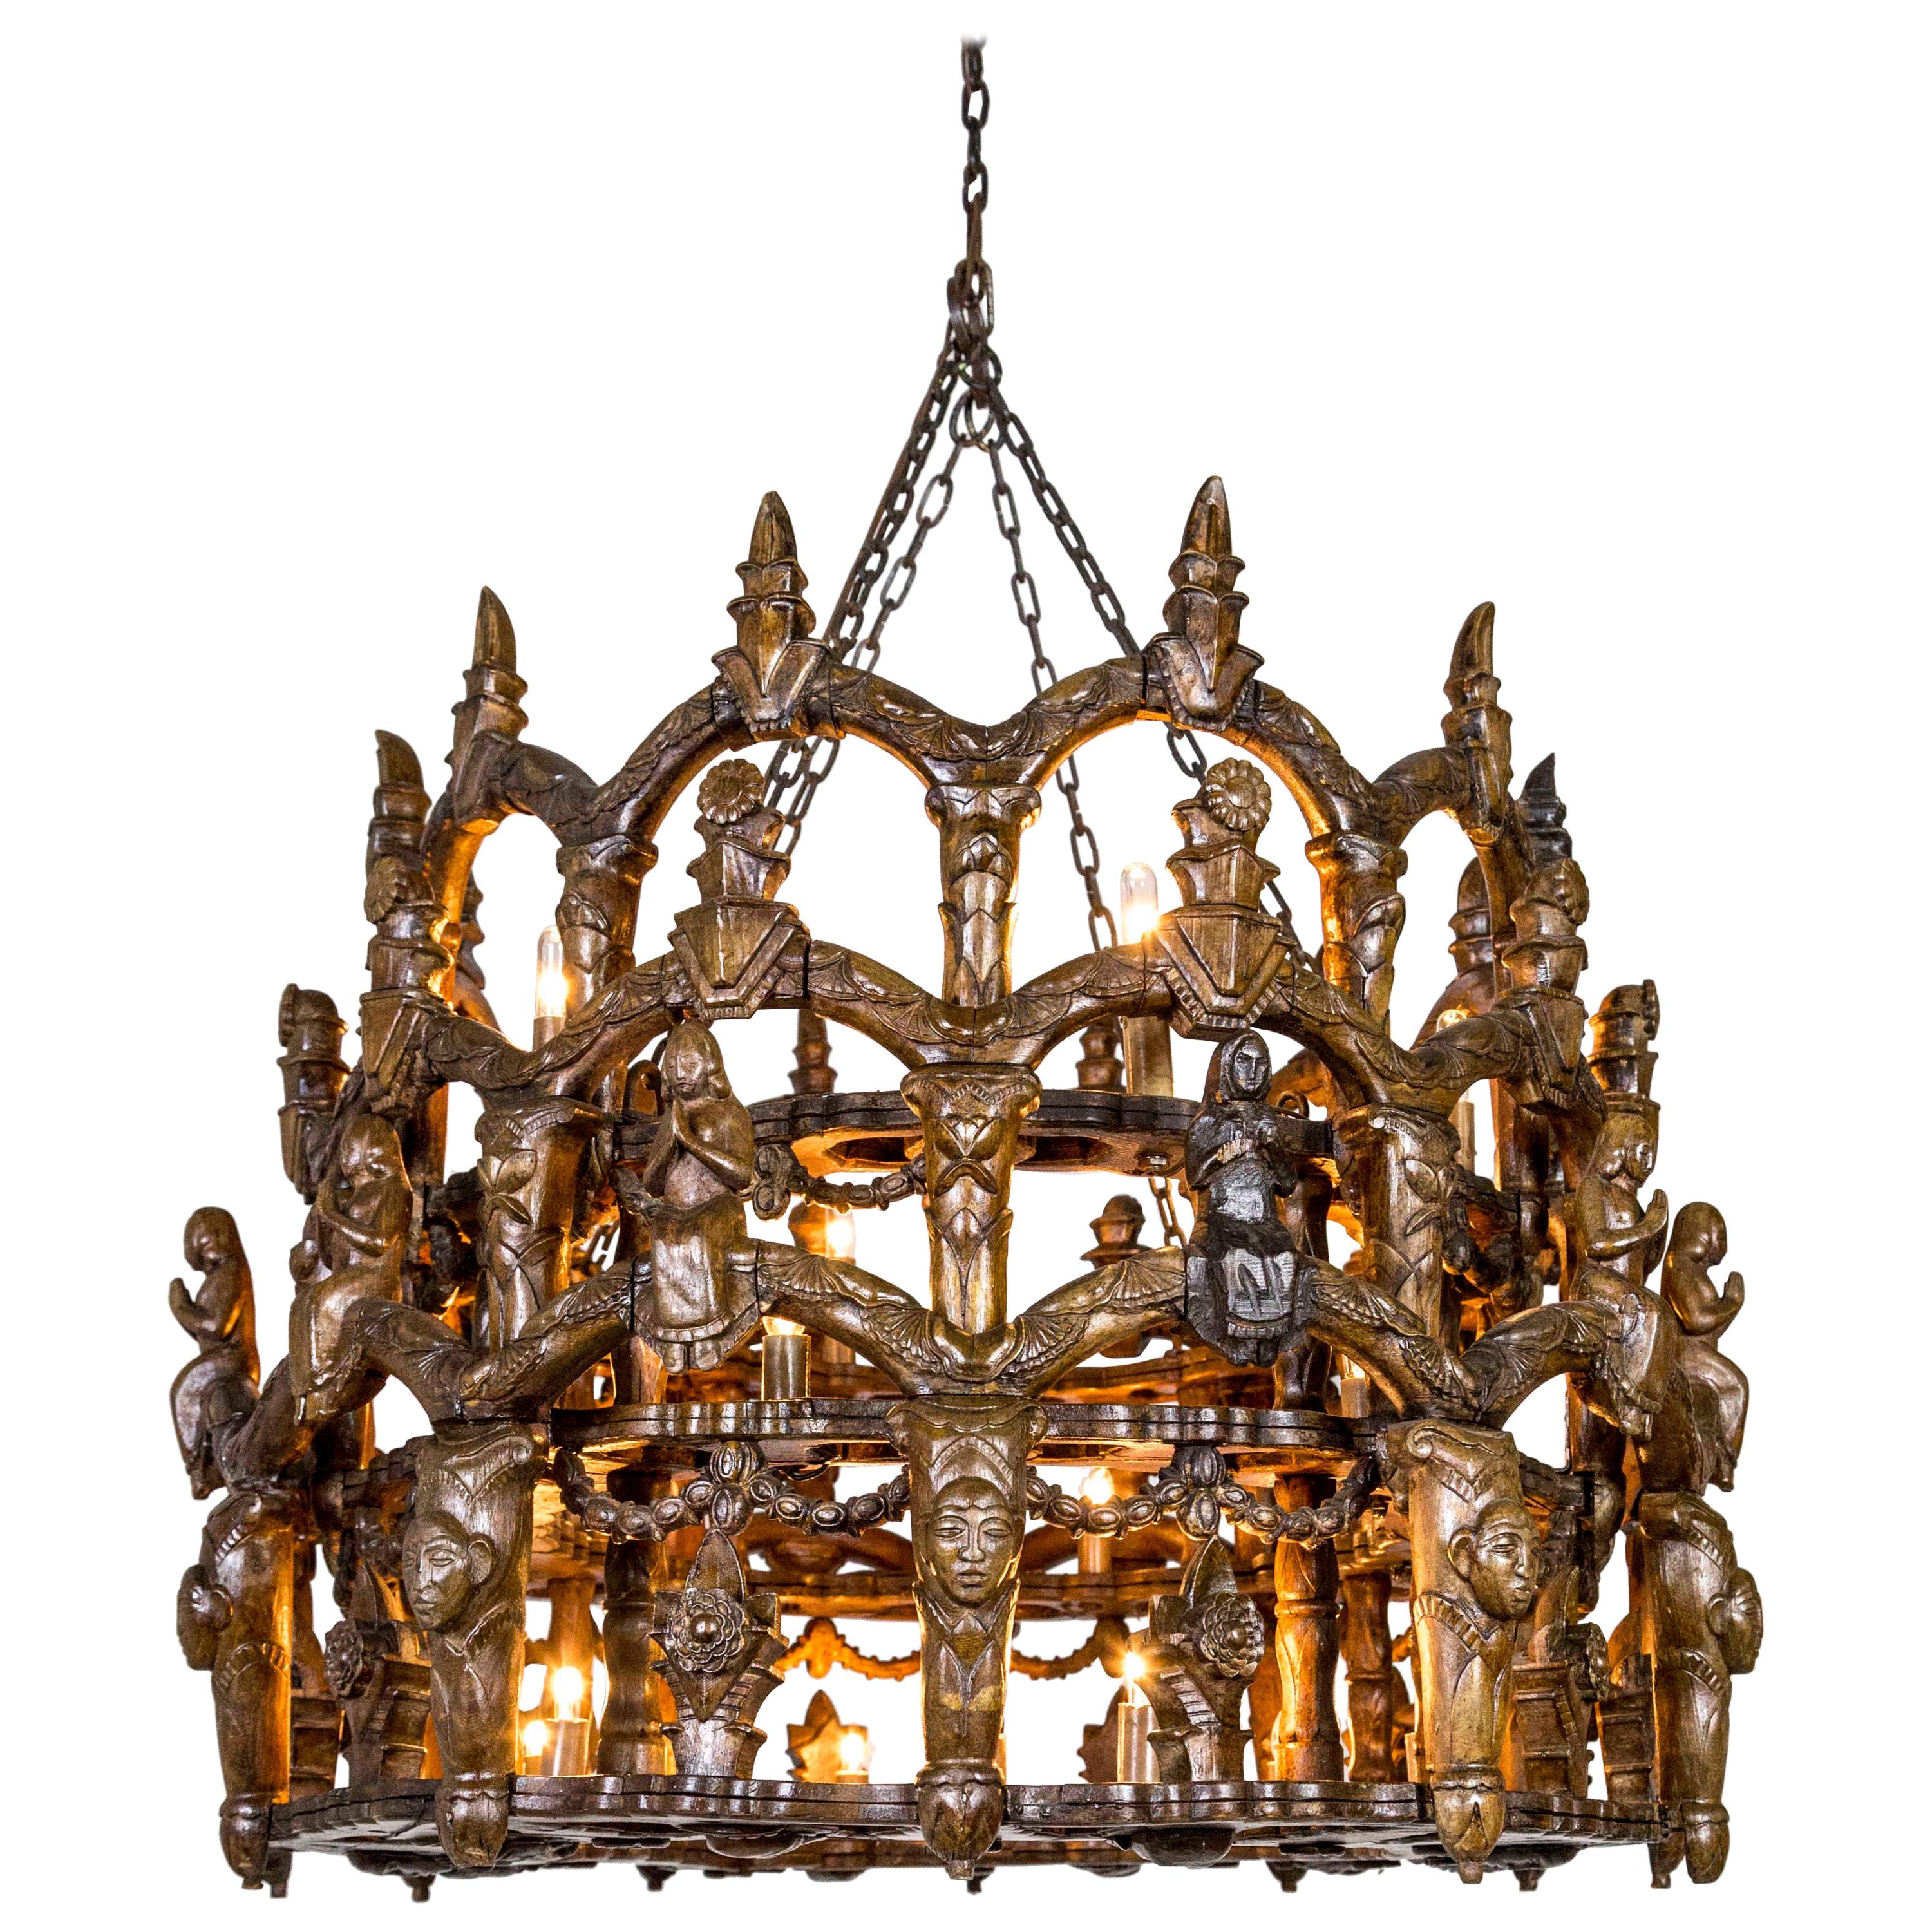 Carved Wooden S. American Folk Chandelier with Figures and Arches